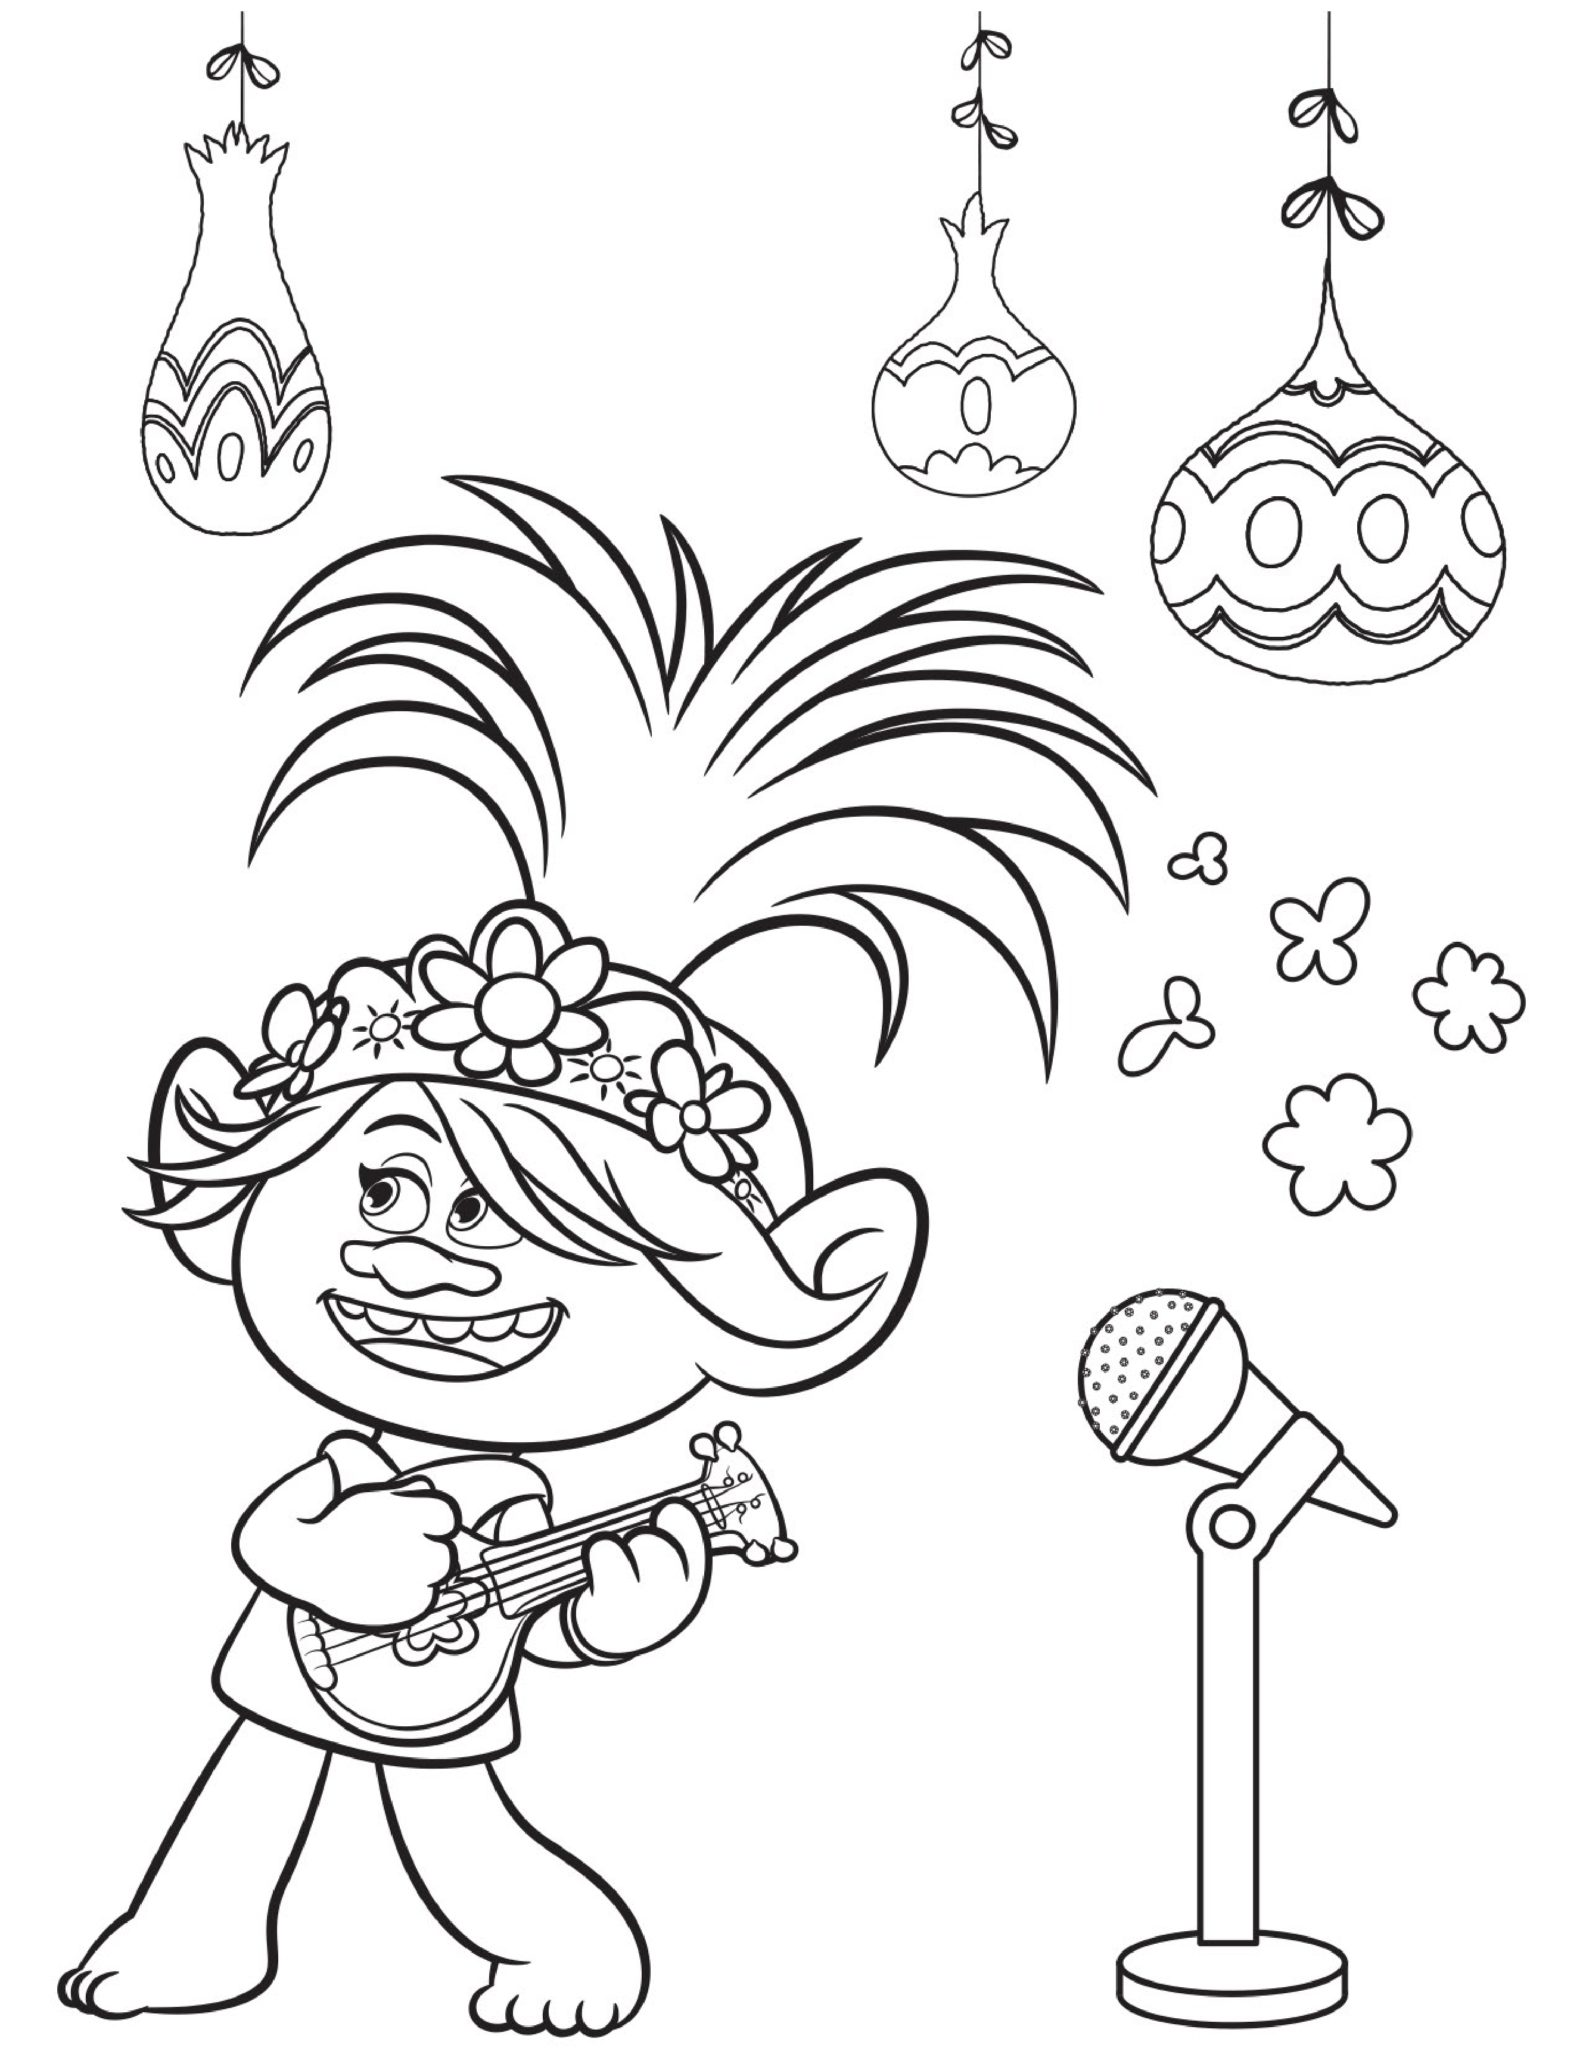 Free printable trolls coloring pages activity sheets zoom backgrounds more crazy adventures in parenting